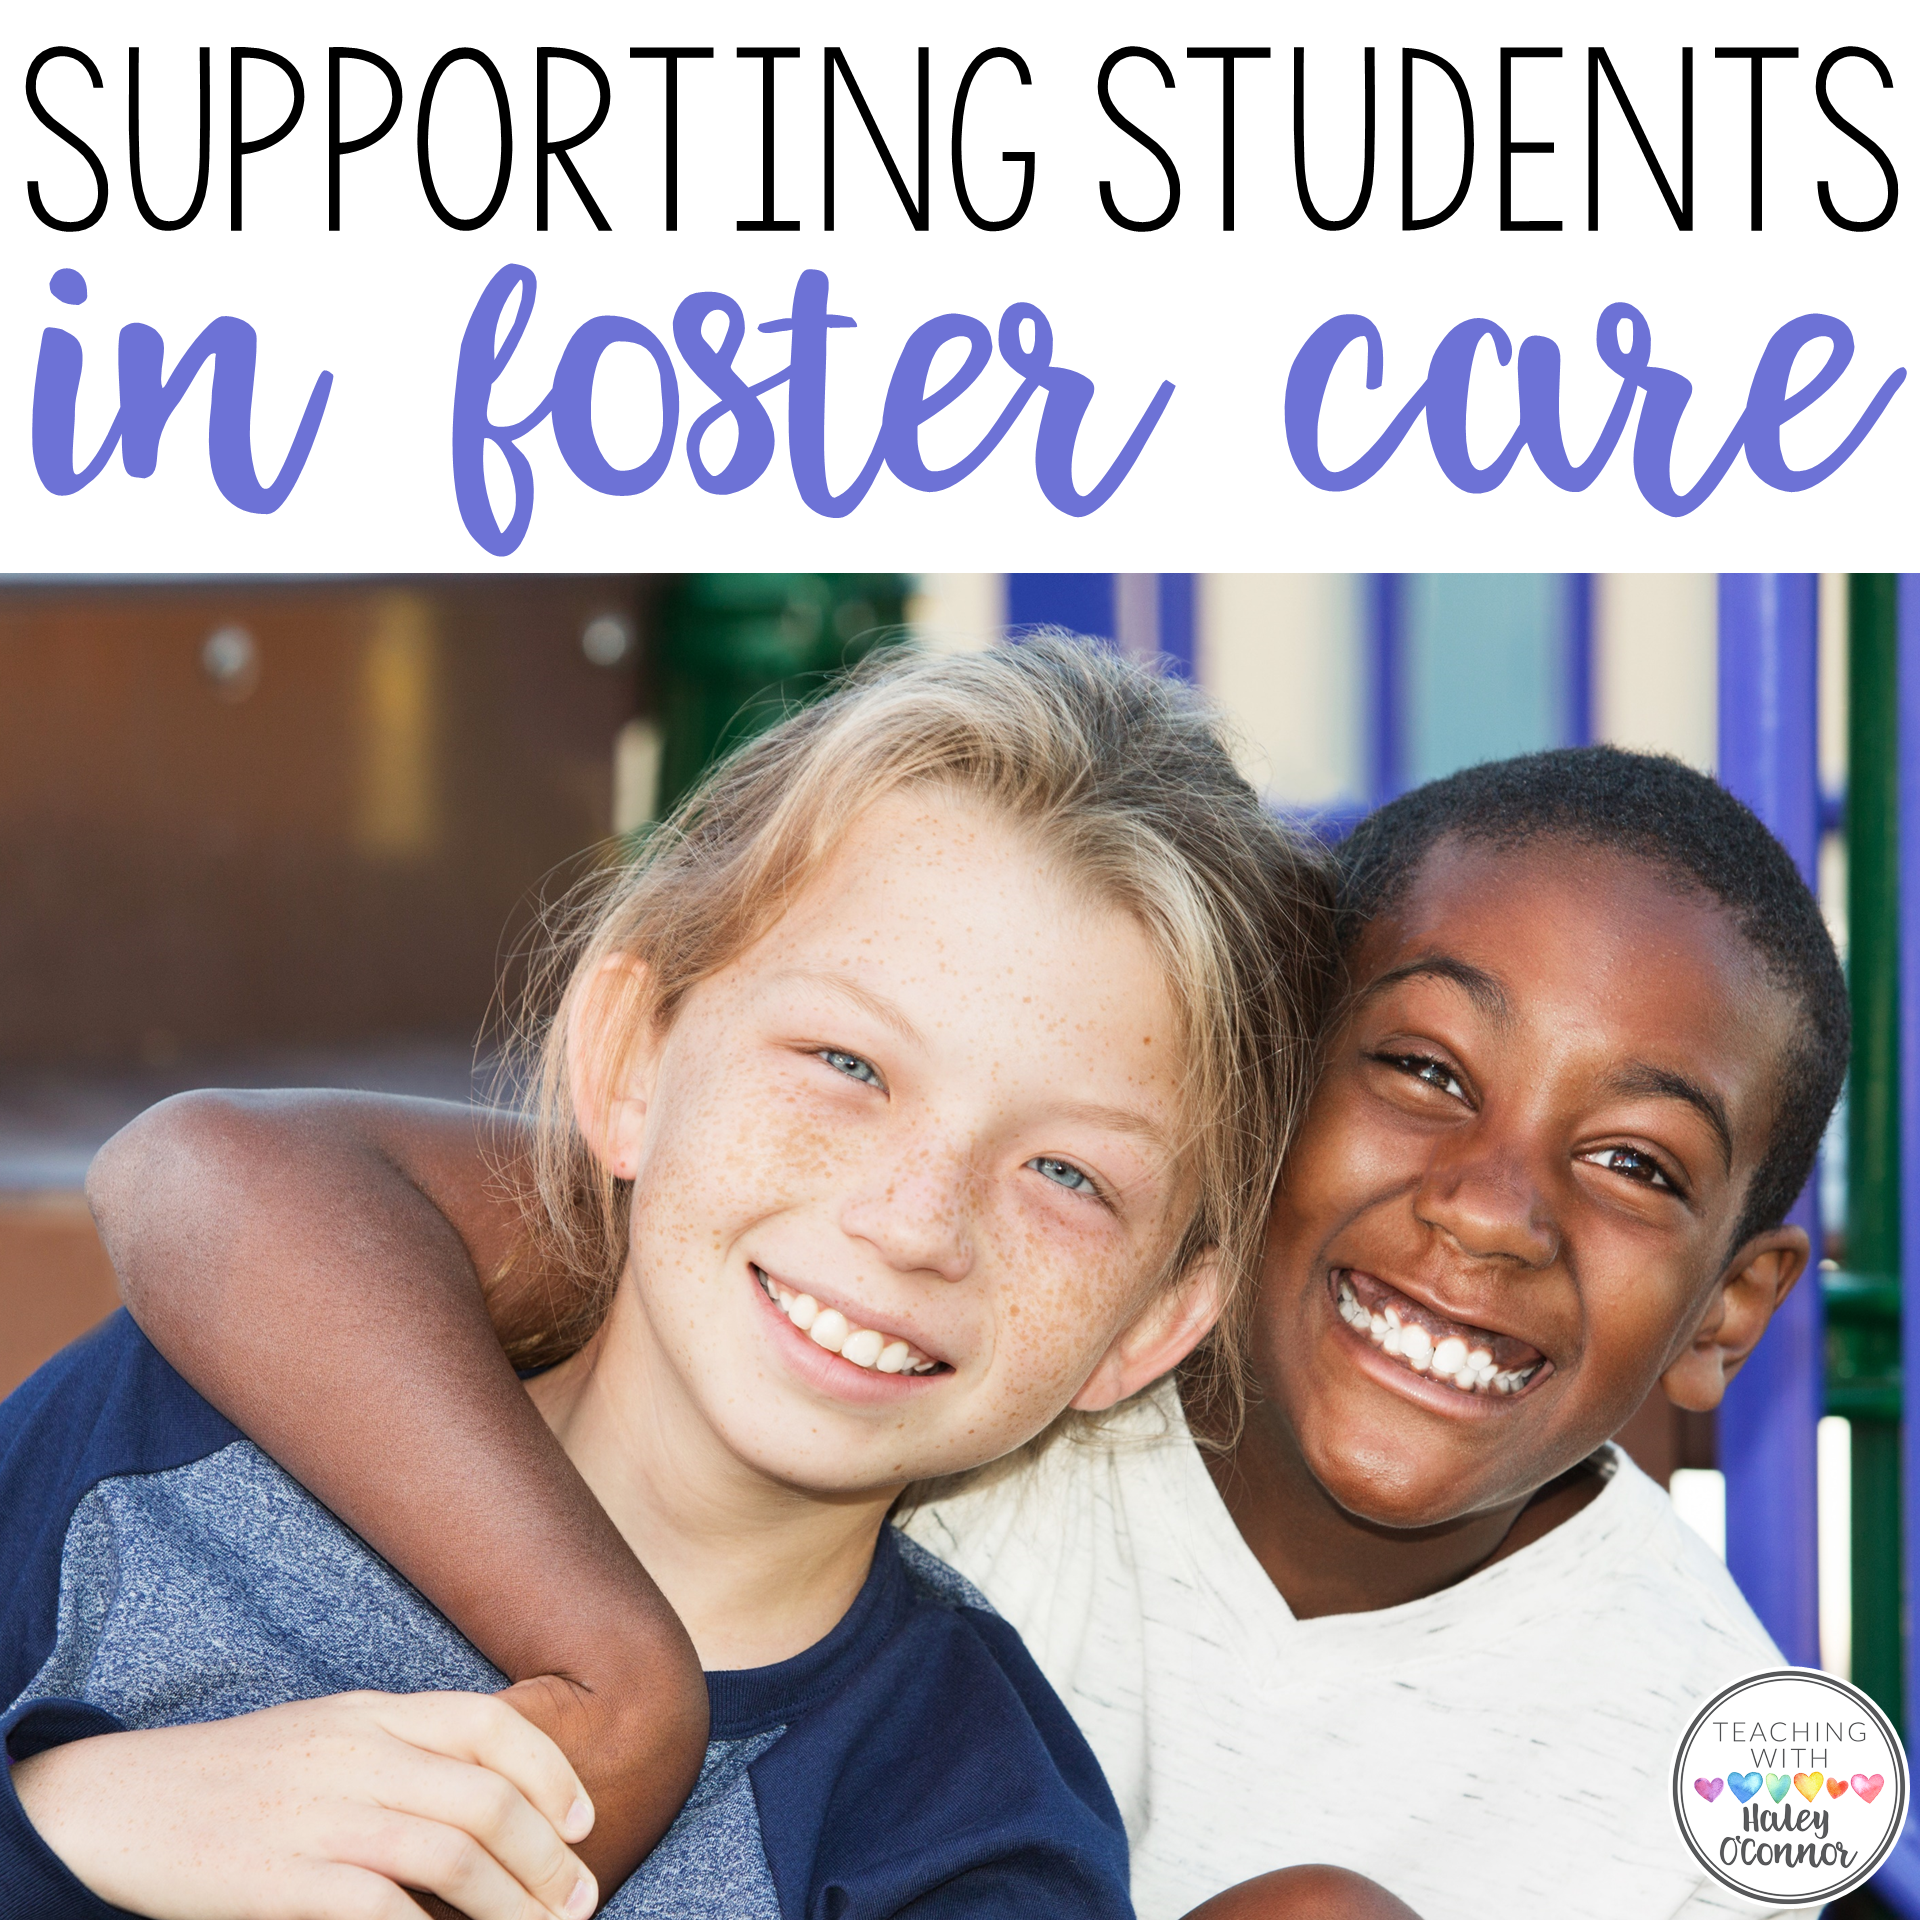 Supporting Students in Foster Care